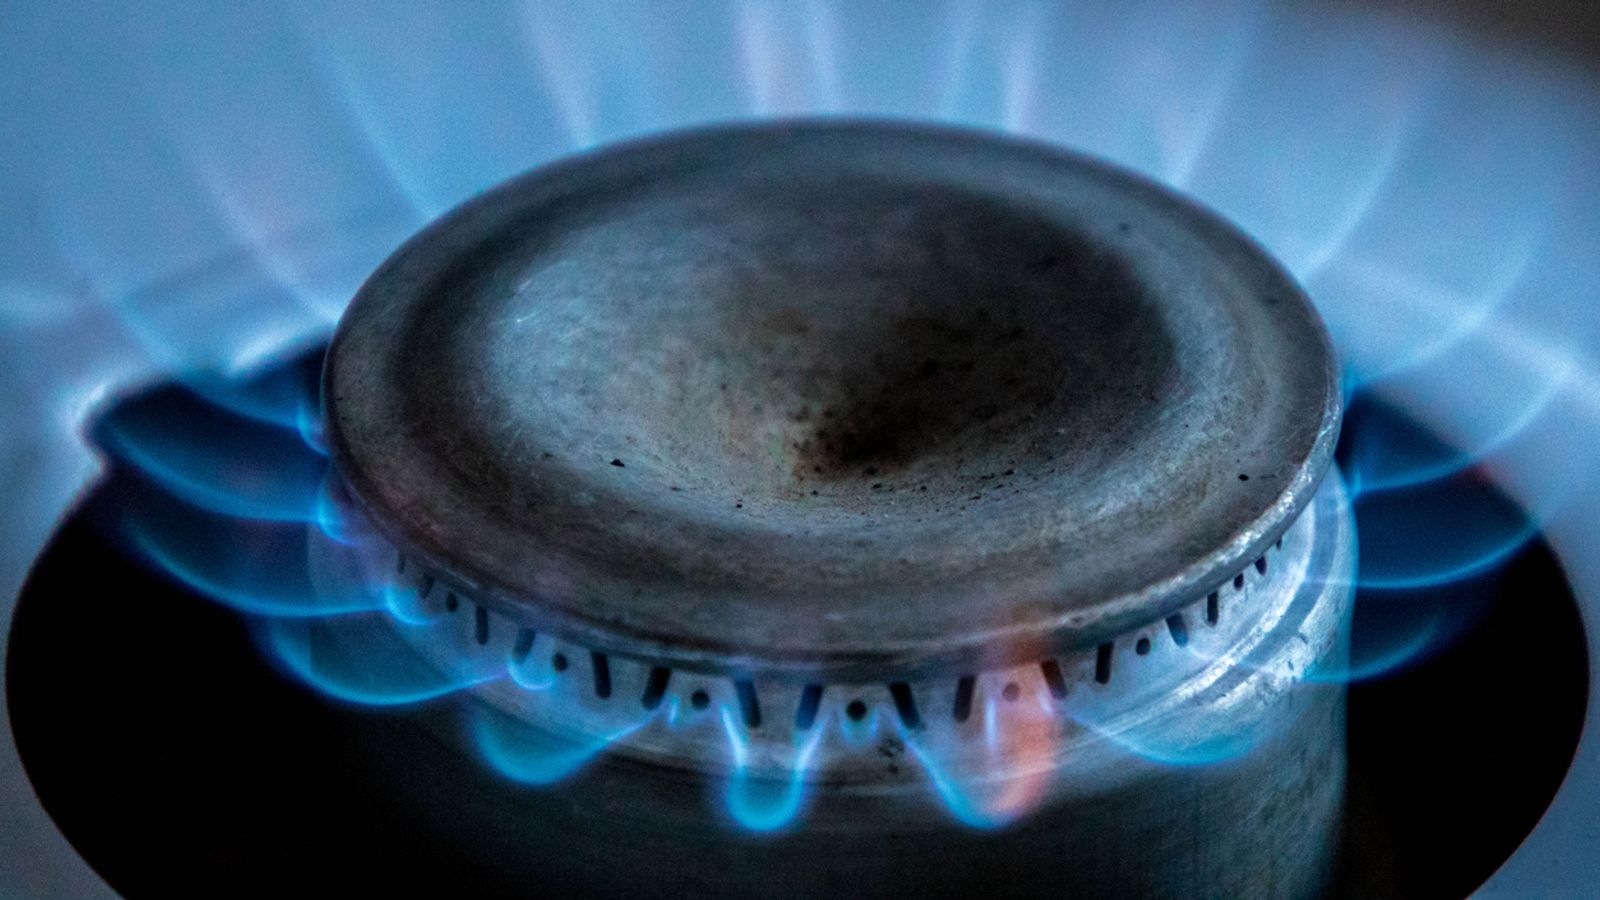 Business secretary 'horrified' at claims British Gas sent debt firm who broke into homes to install prepay meters